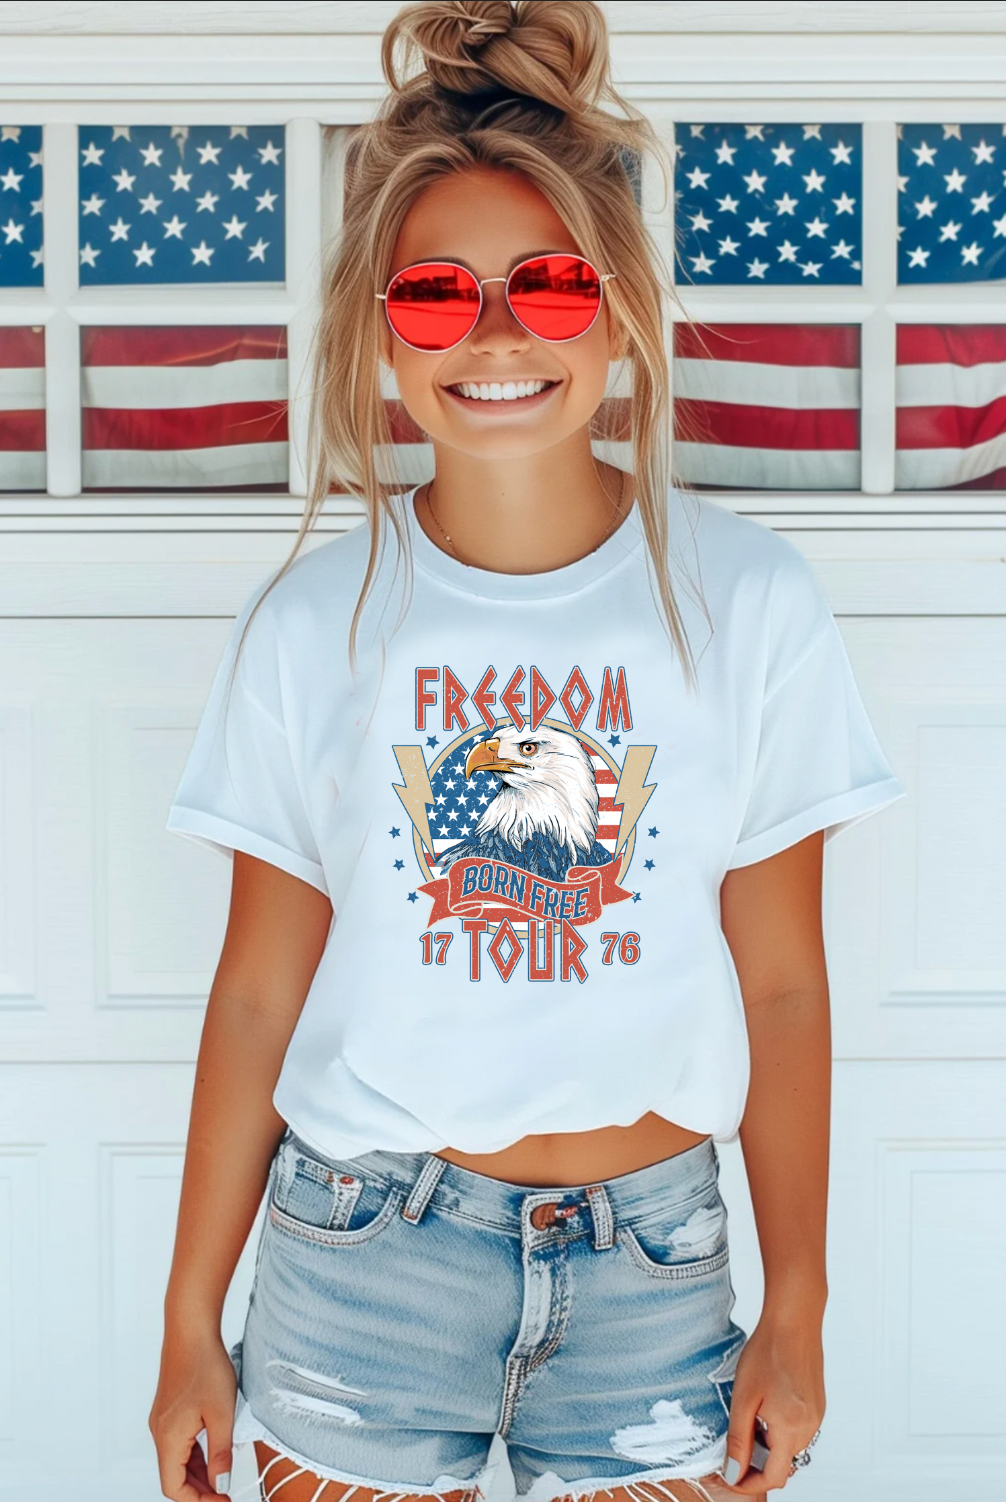 Freedom Tour. Born Free 1776. Vintage Americana 4th of Julysoft t-shirt from Bella and Canvas. Color shirt is white.